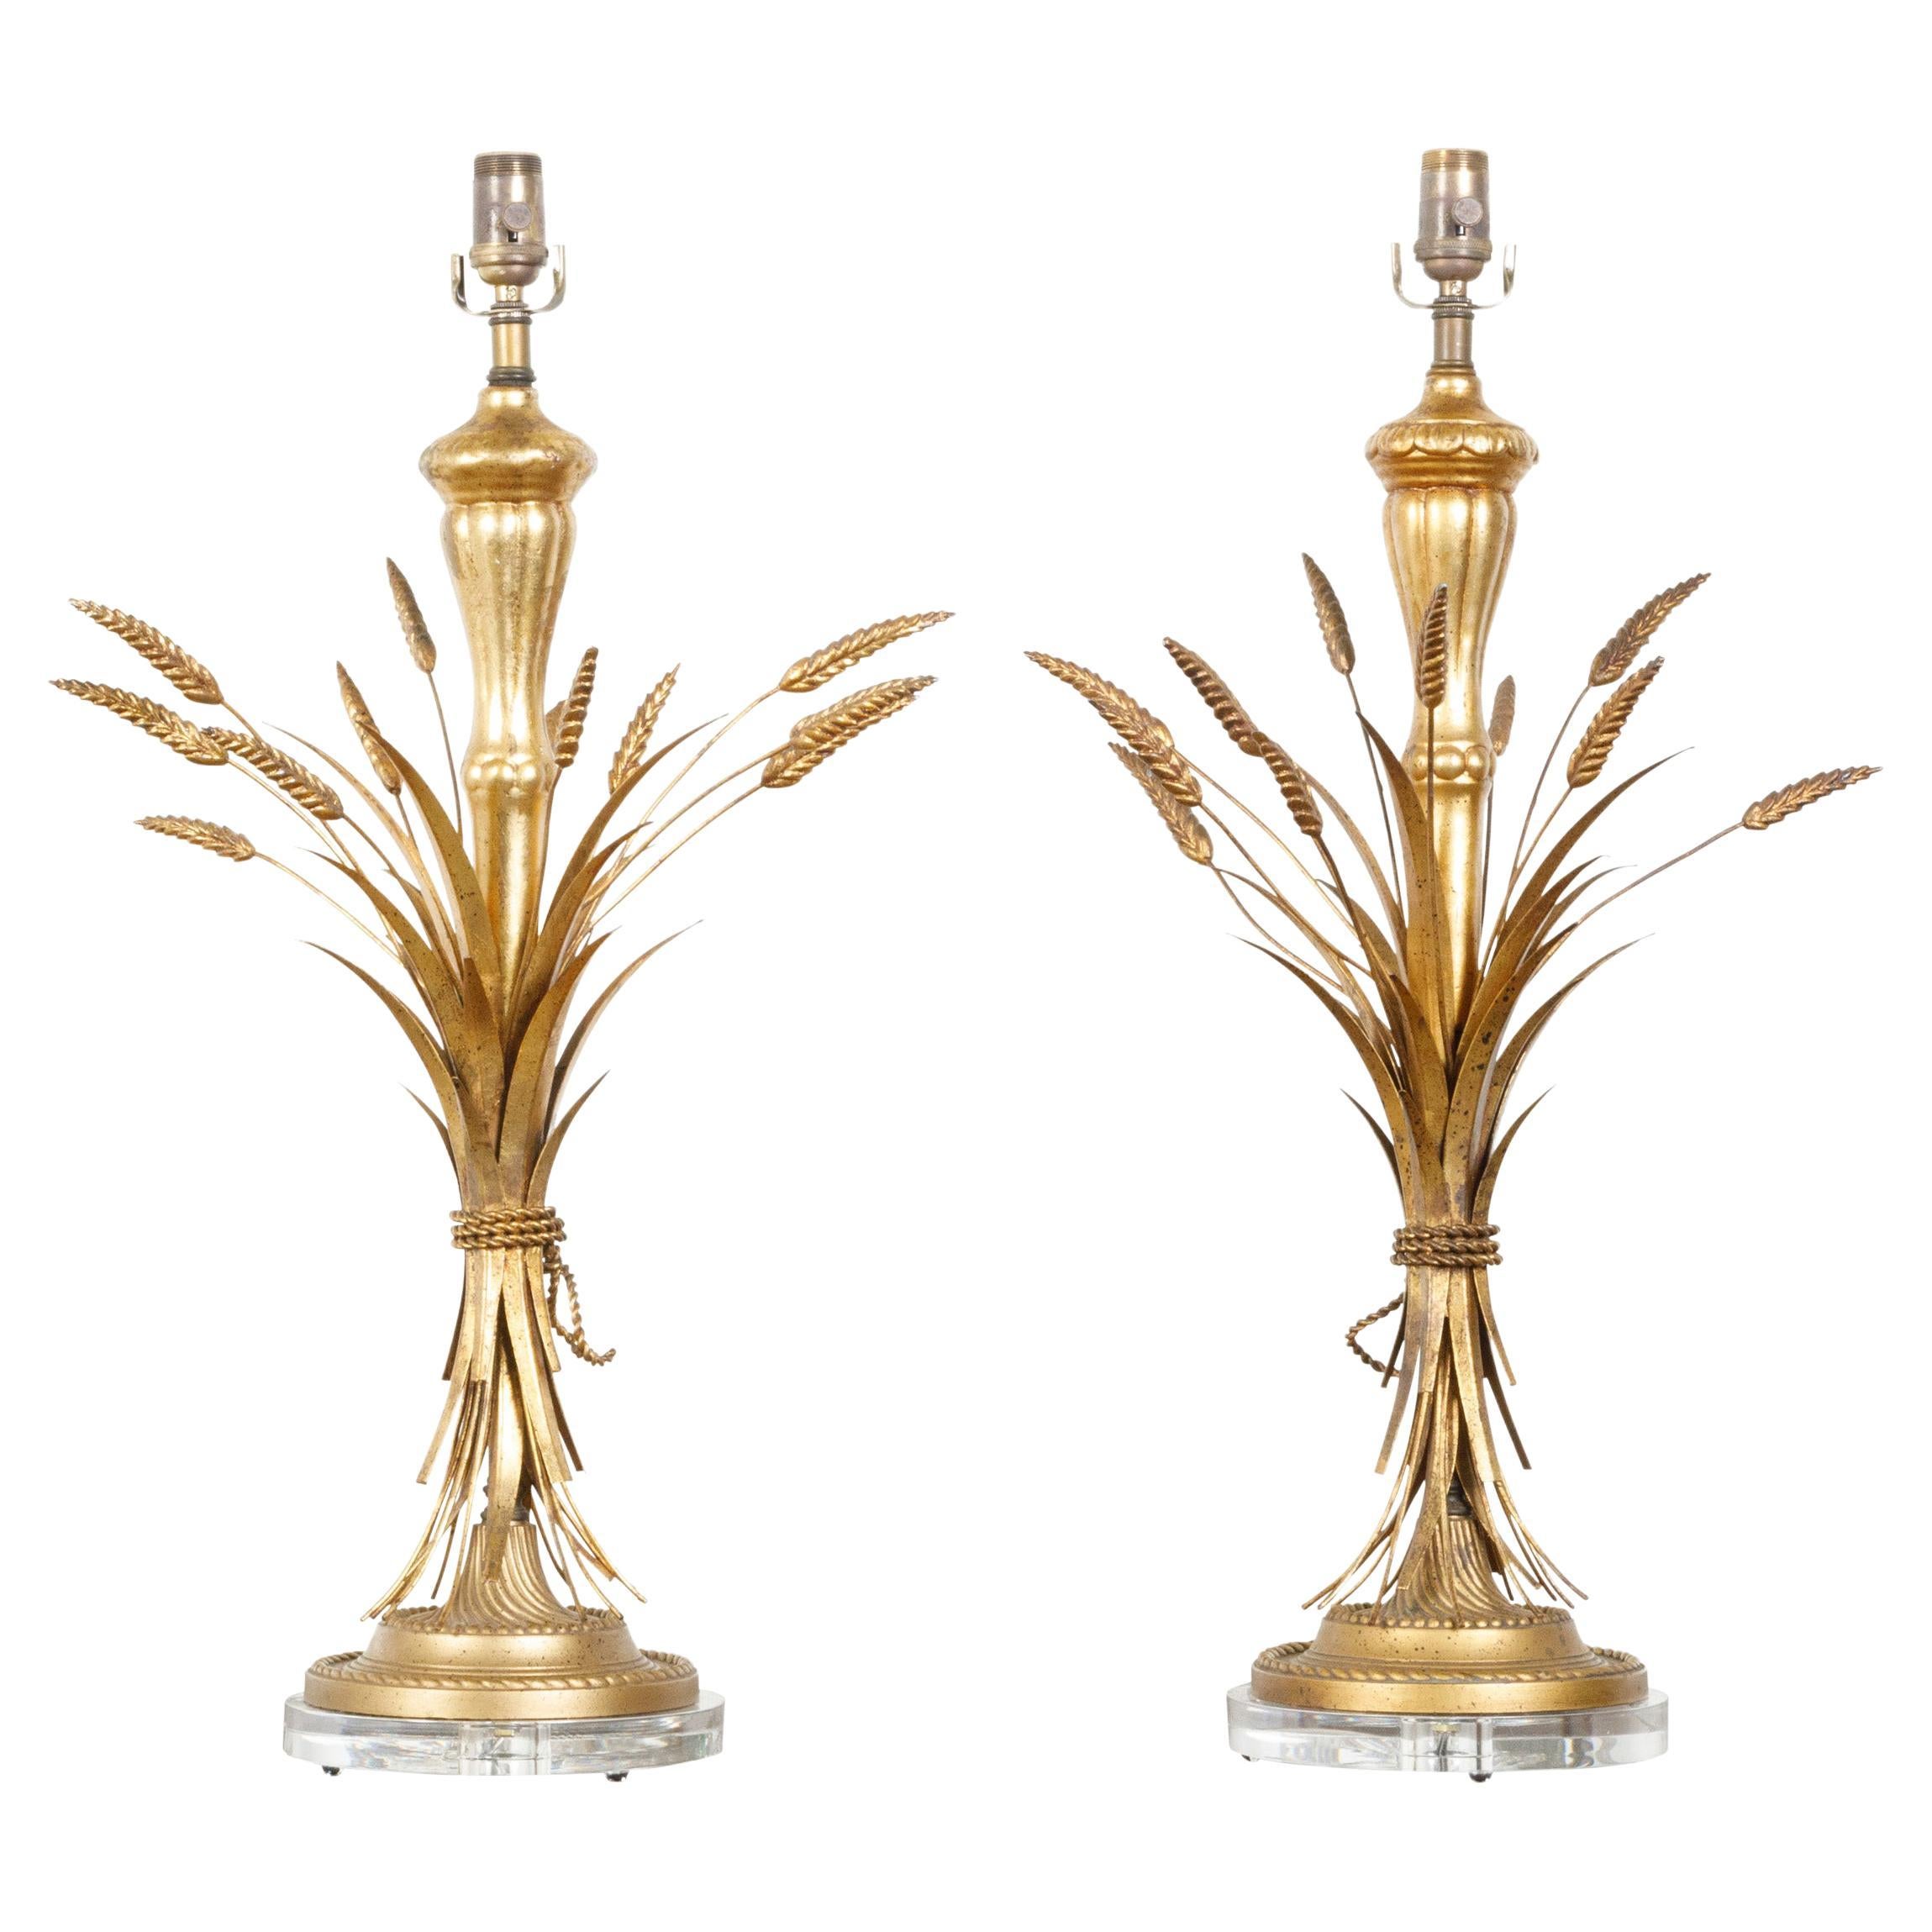 Sheaf of Wheat Gilt Metal Midcentury Table Lamps Mounted on Lucite Bases